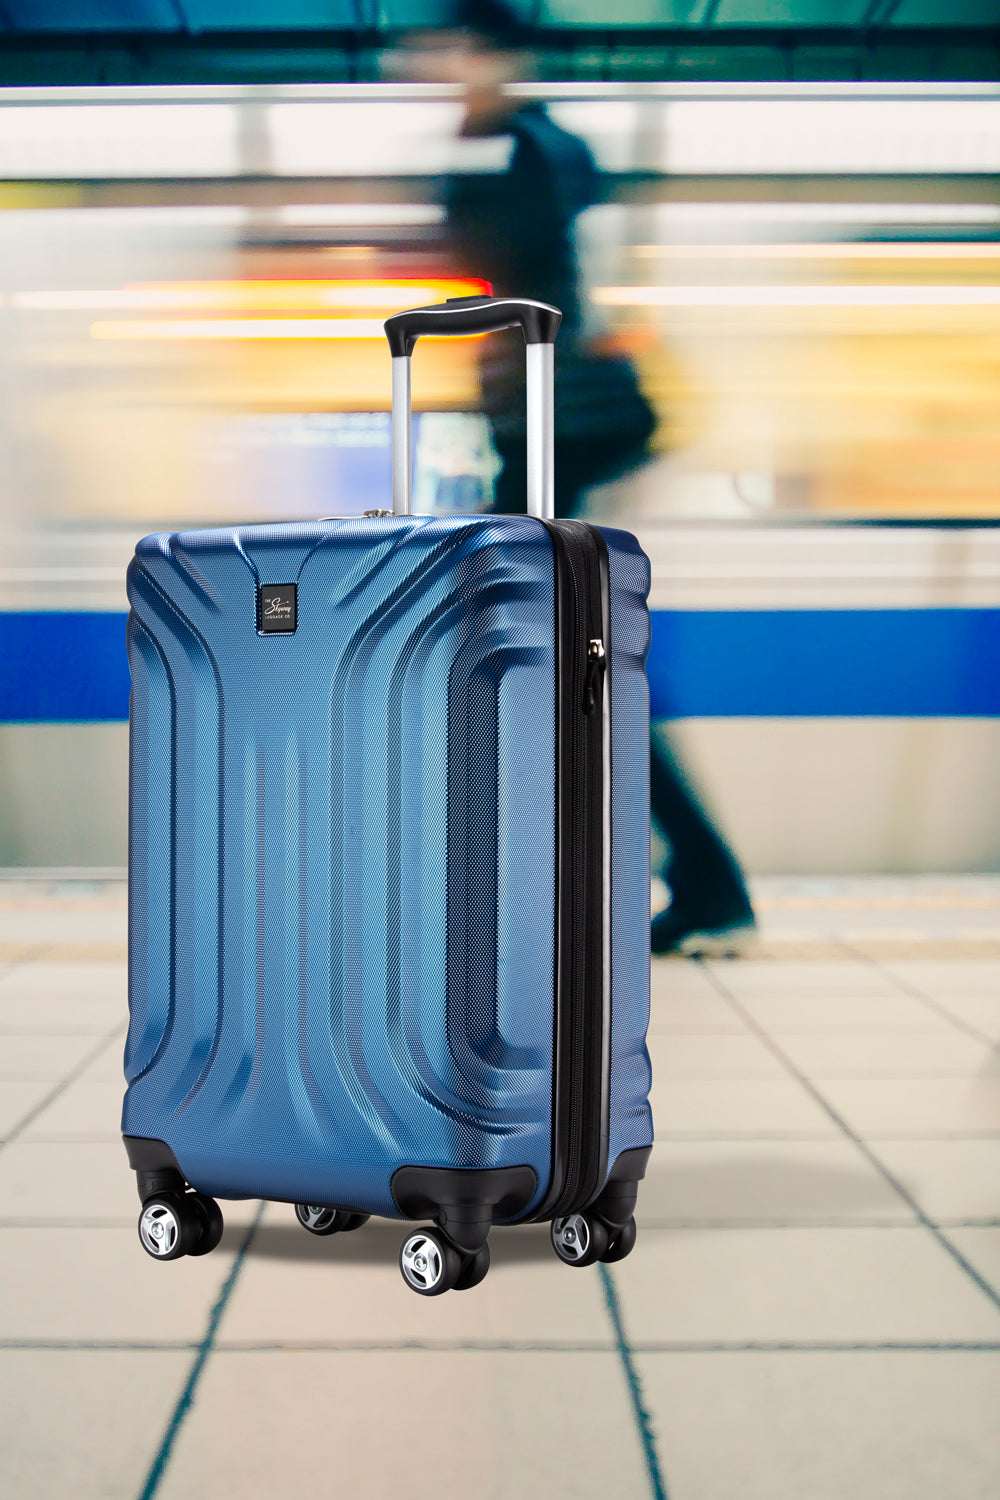 Skyway Luggage  Traveling the World Since 1910